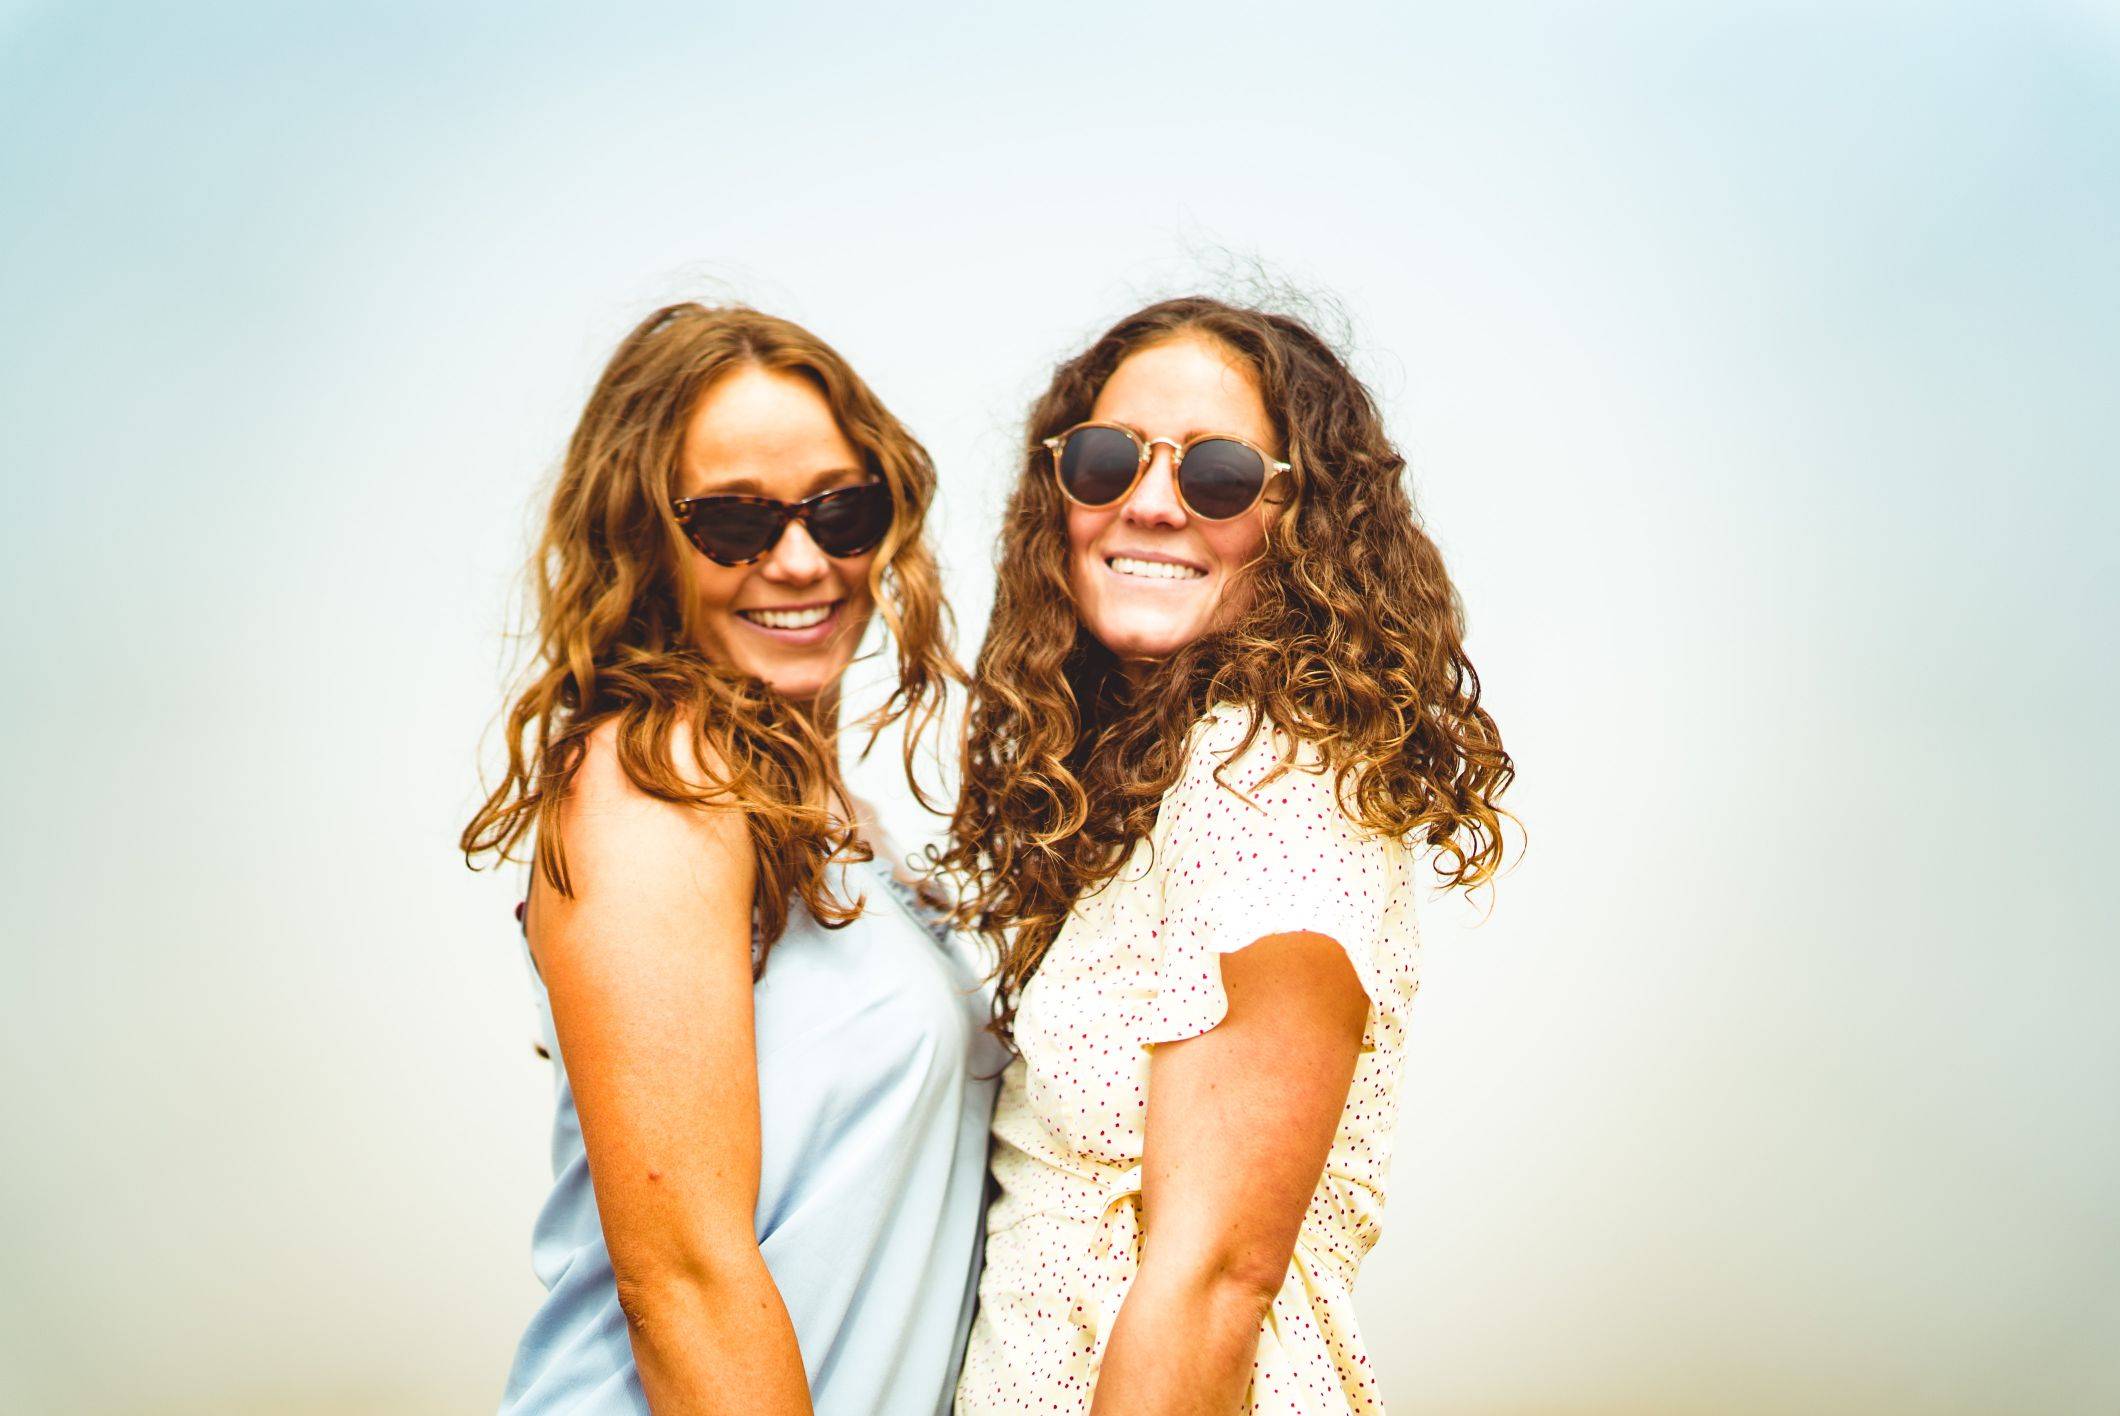 Image of a two women with curly and wavy hair